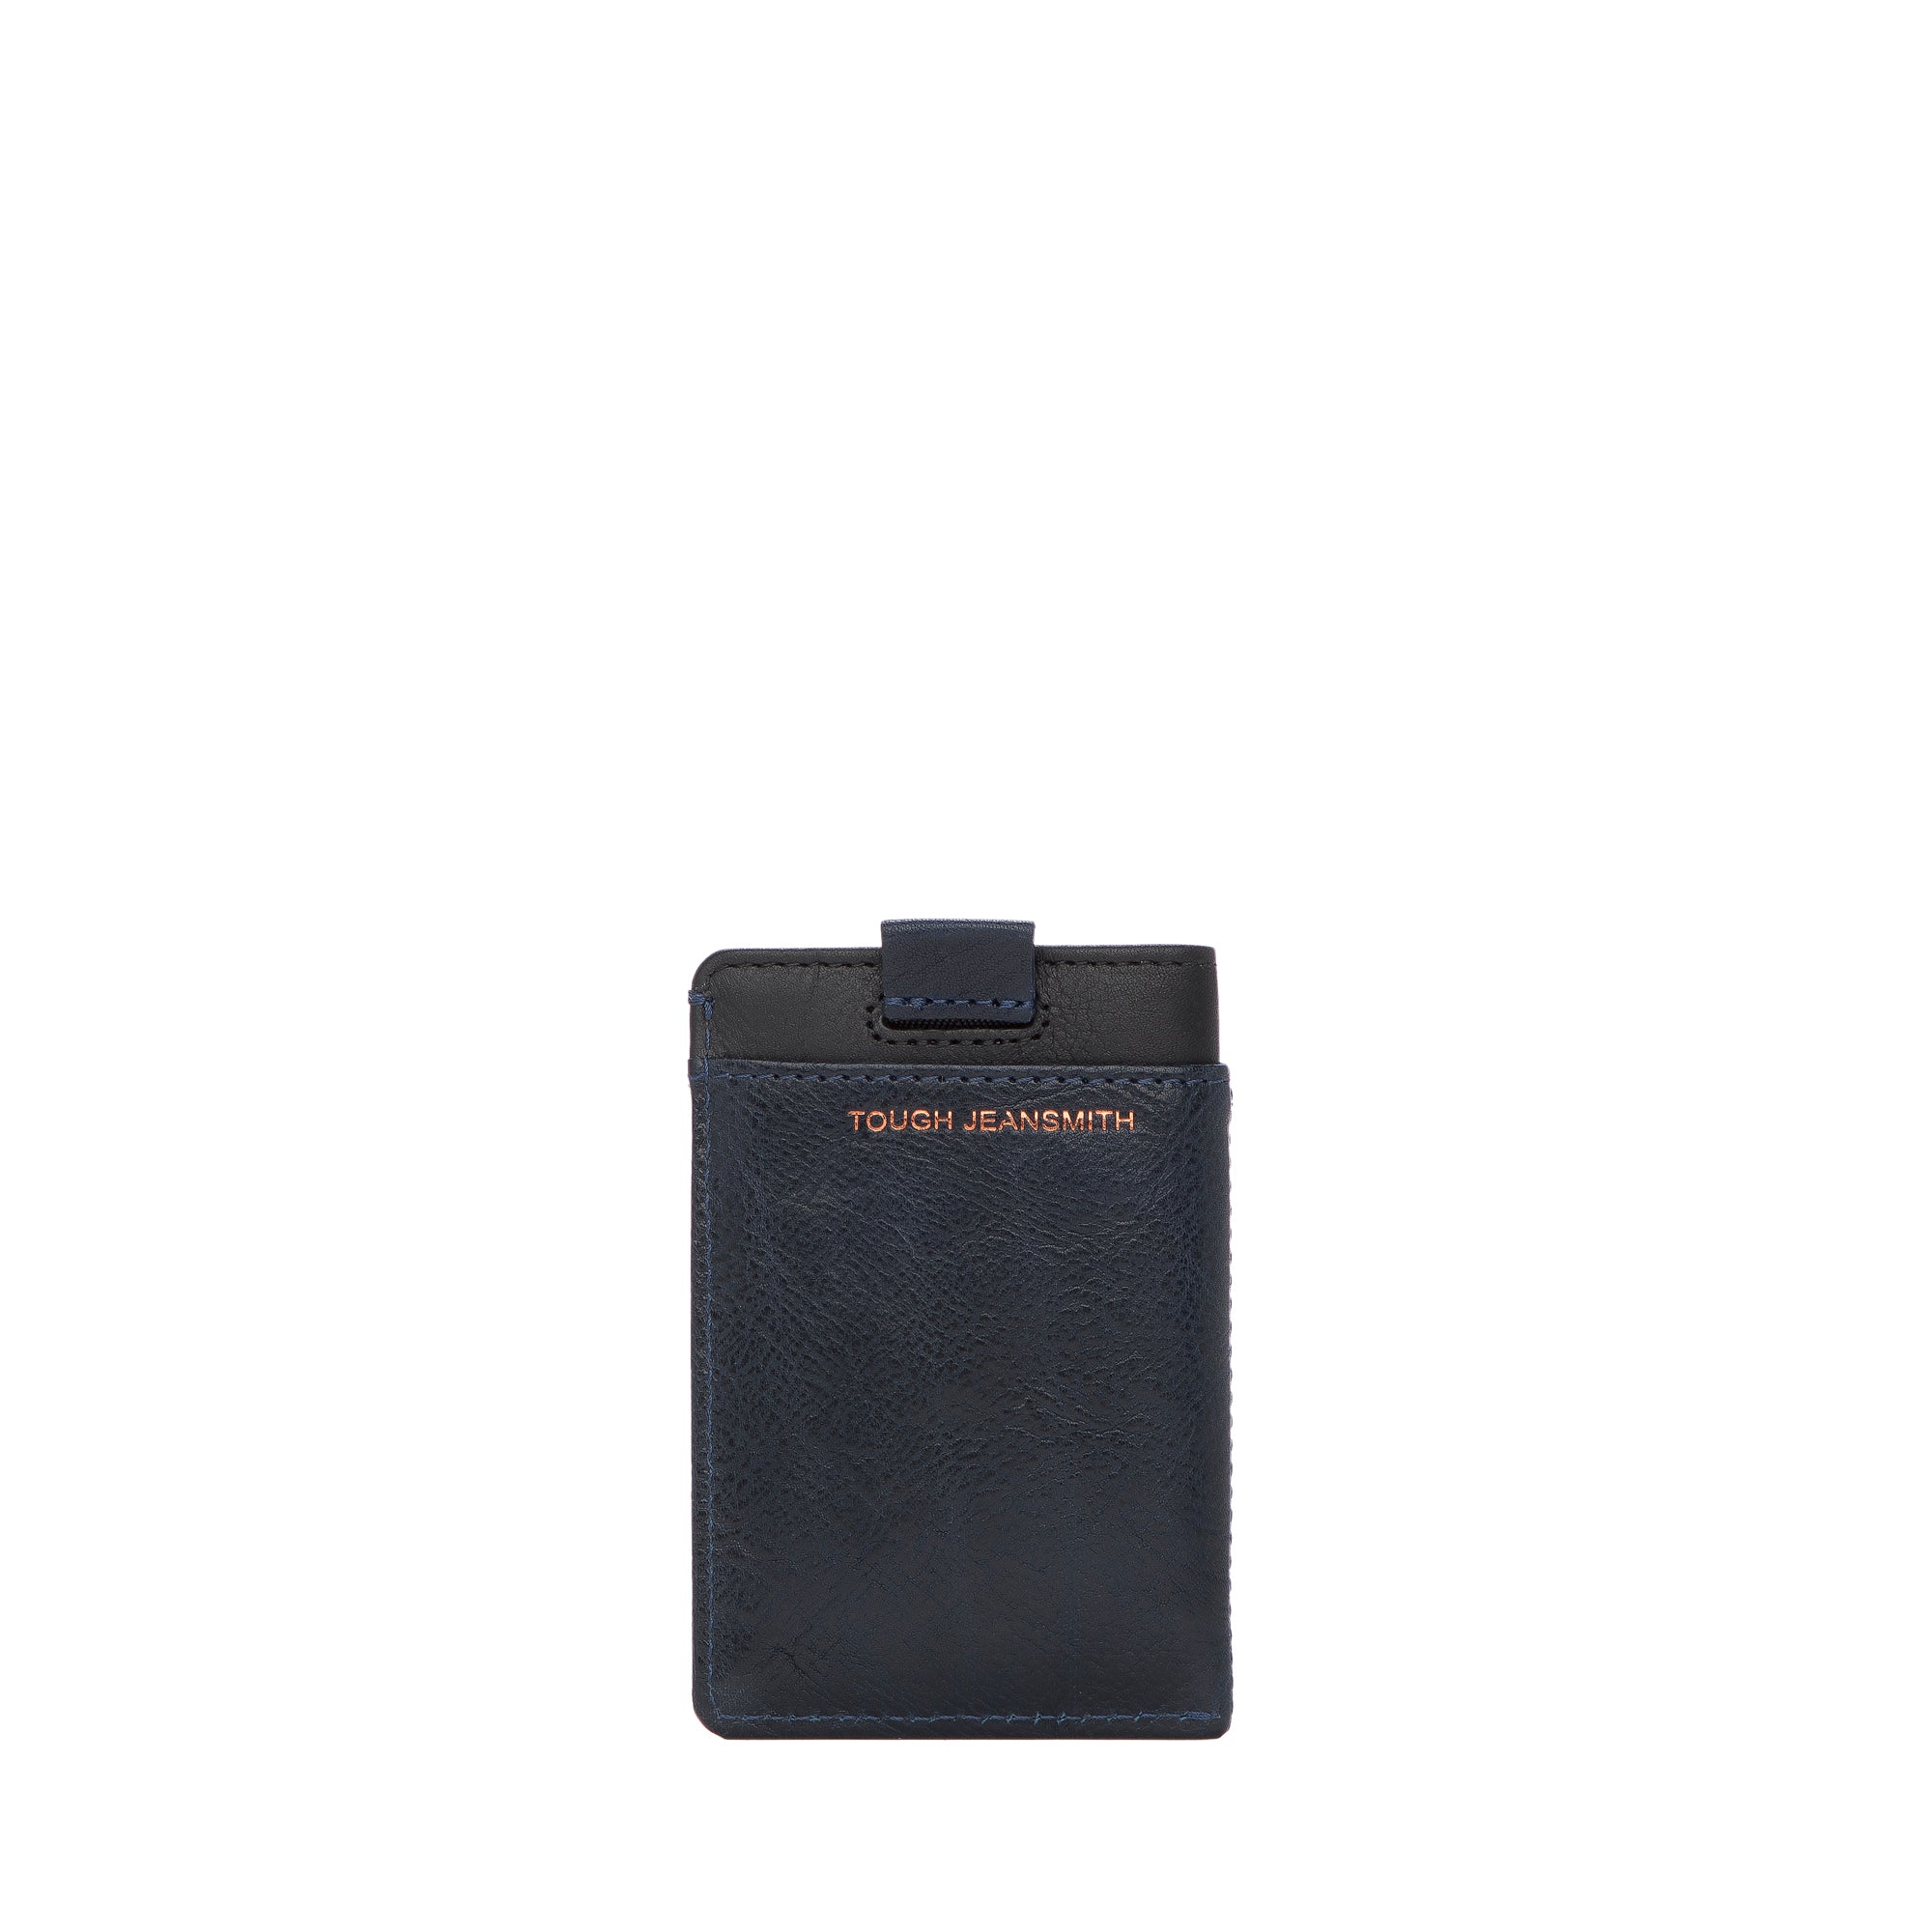 TOUGH JEANSMITH T-21 Card Holder #TW121-007